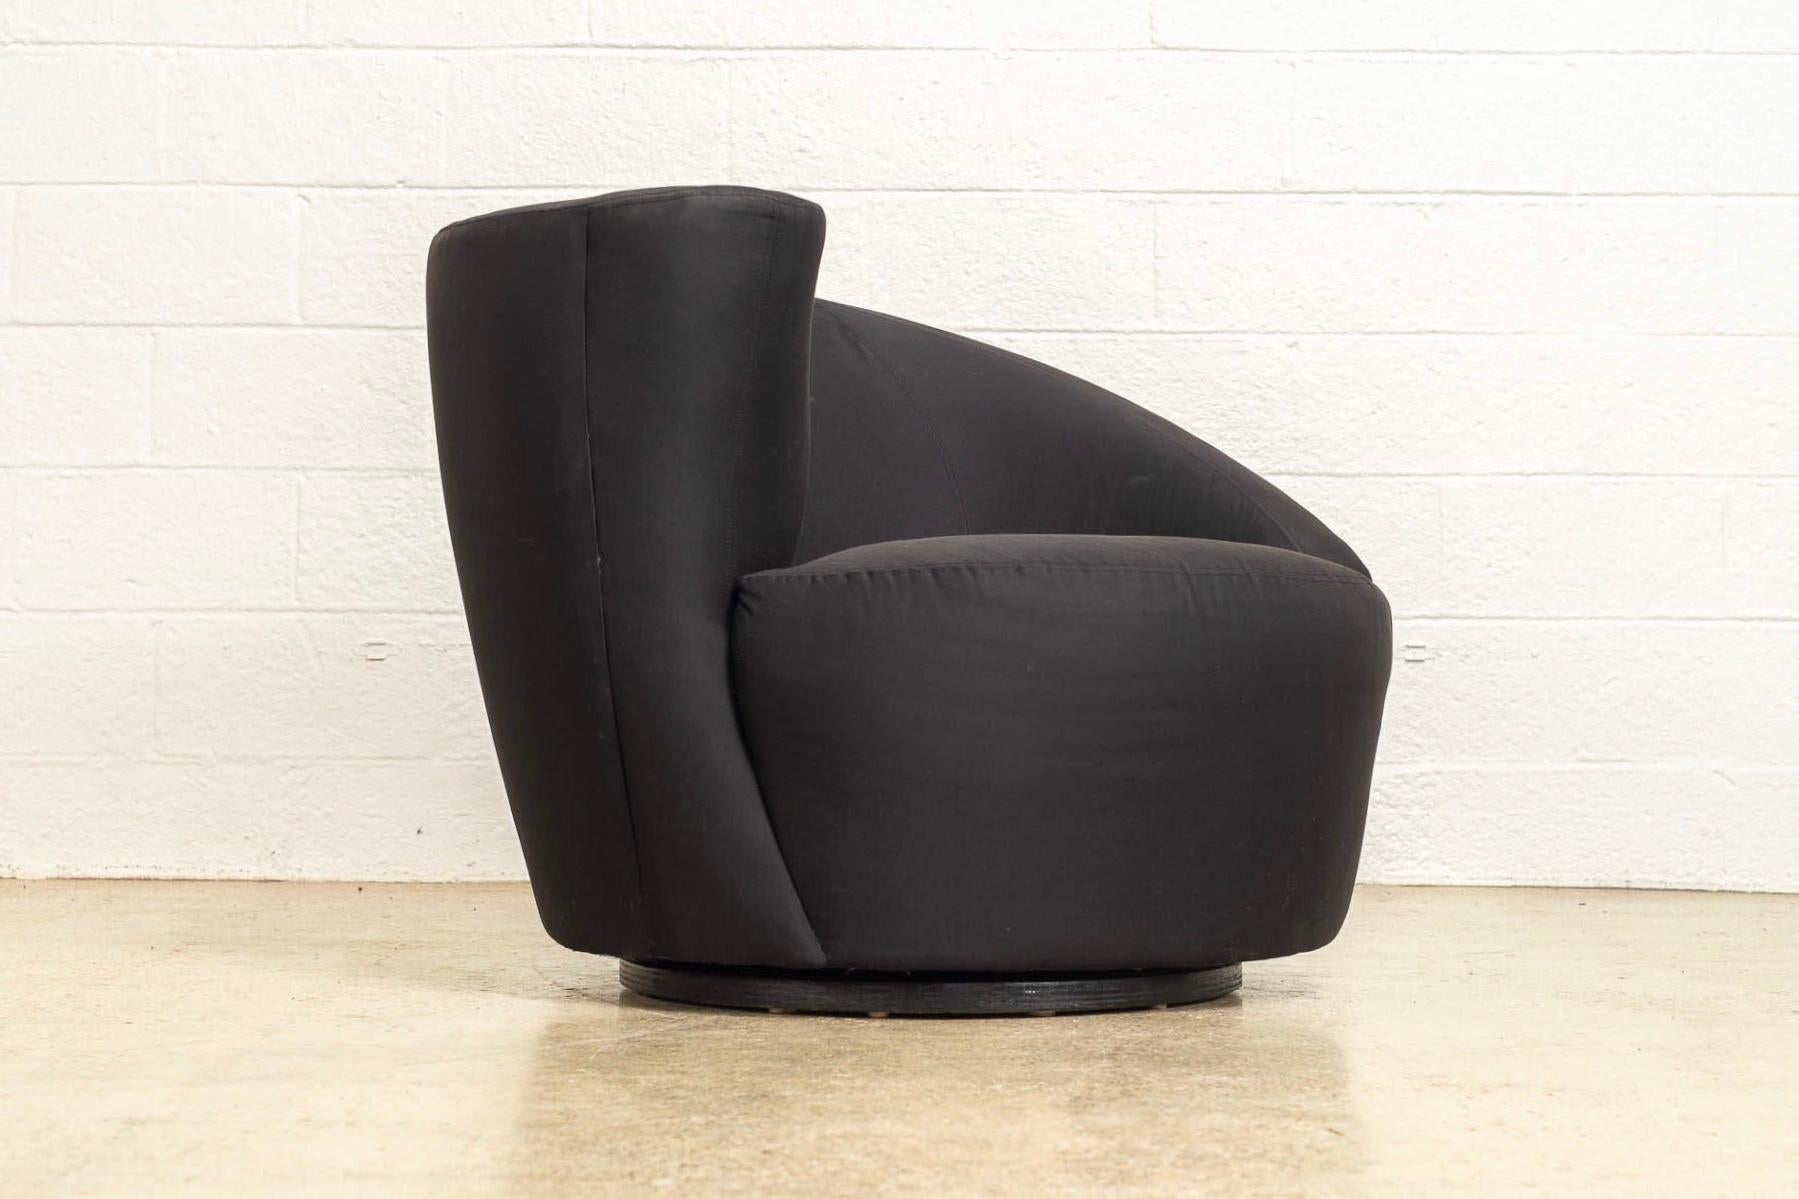 Midcentury Vladimir Kagan for Directional Black Nautilus Lounge Chairs, a Pair For Sale 2